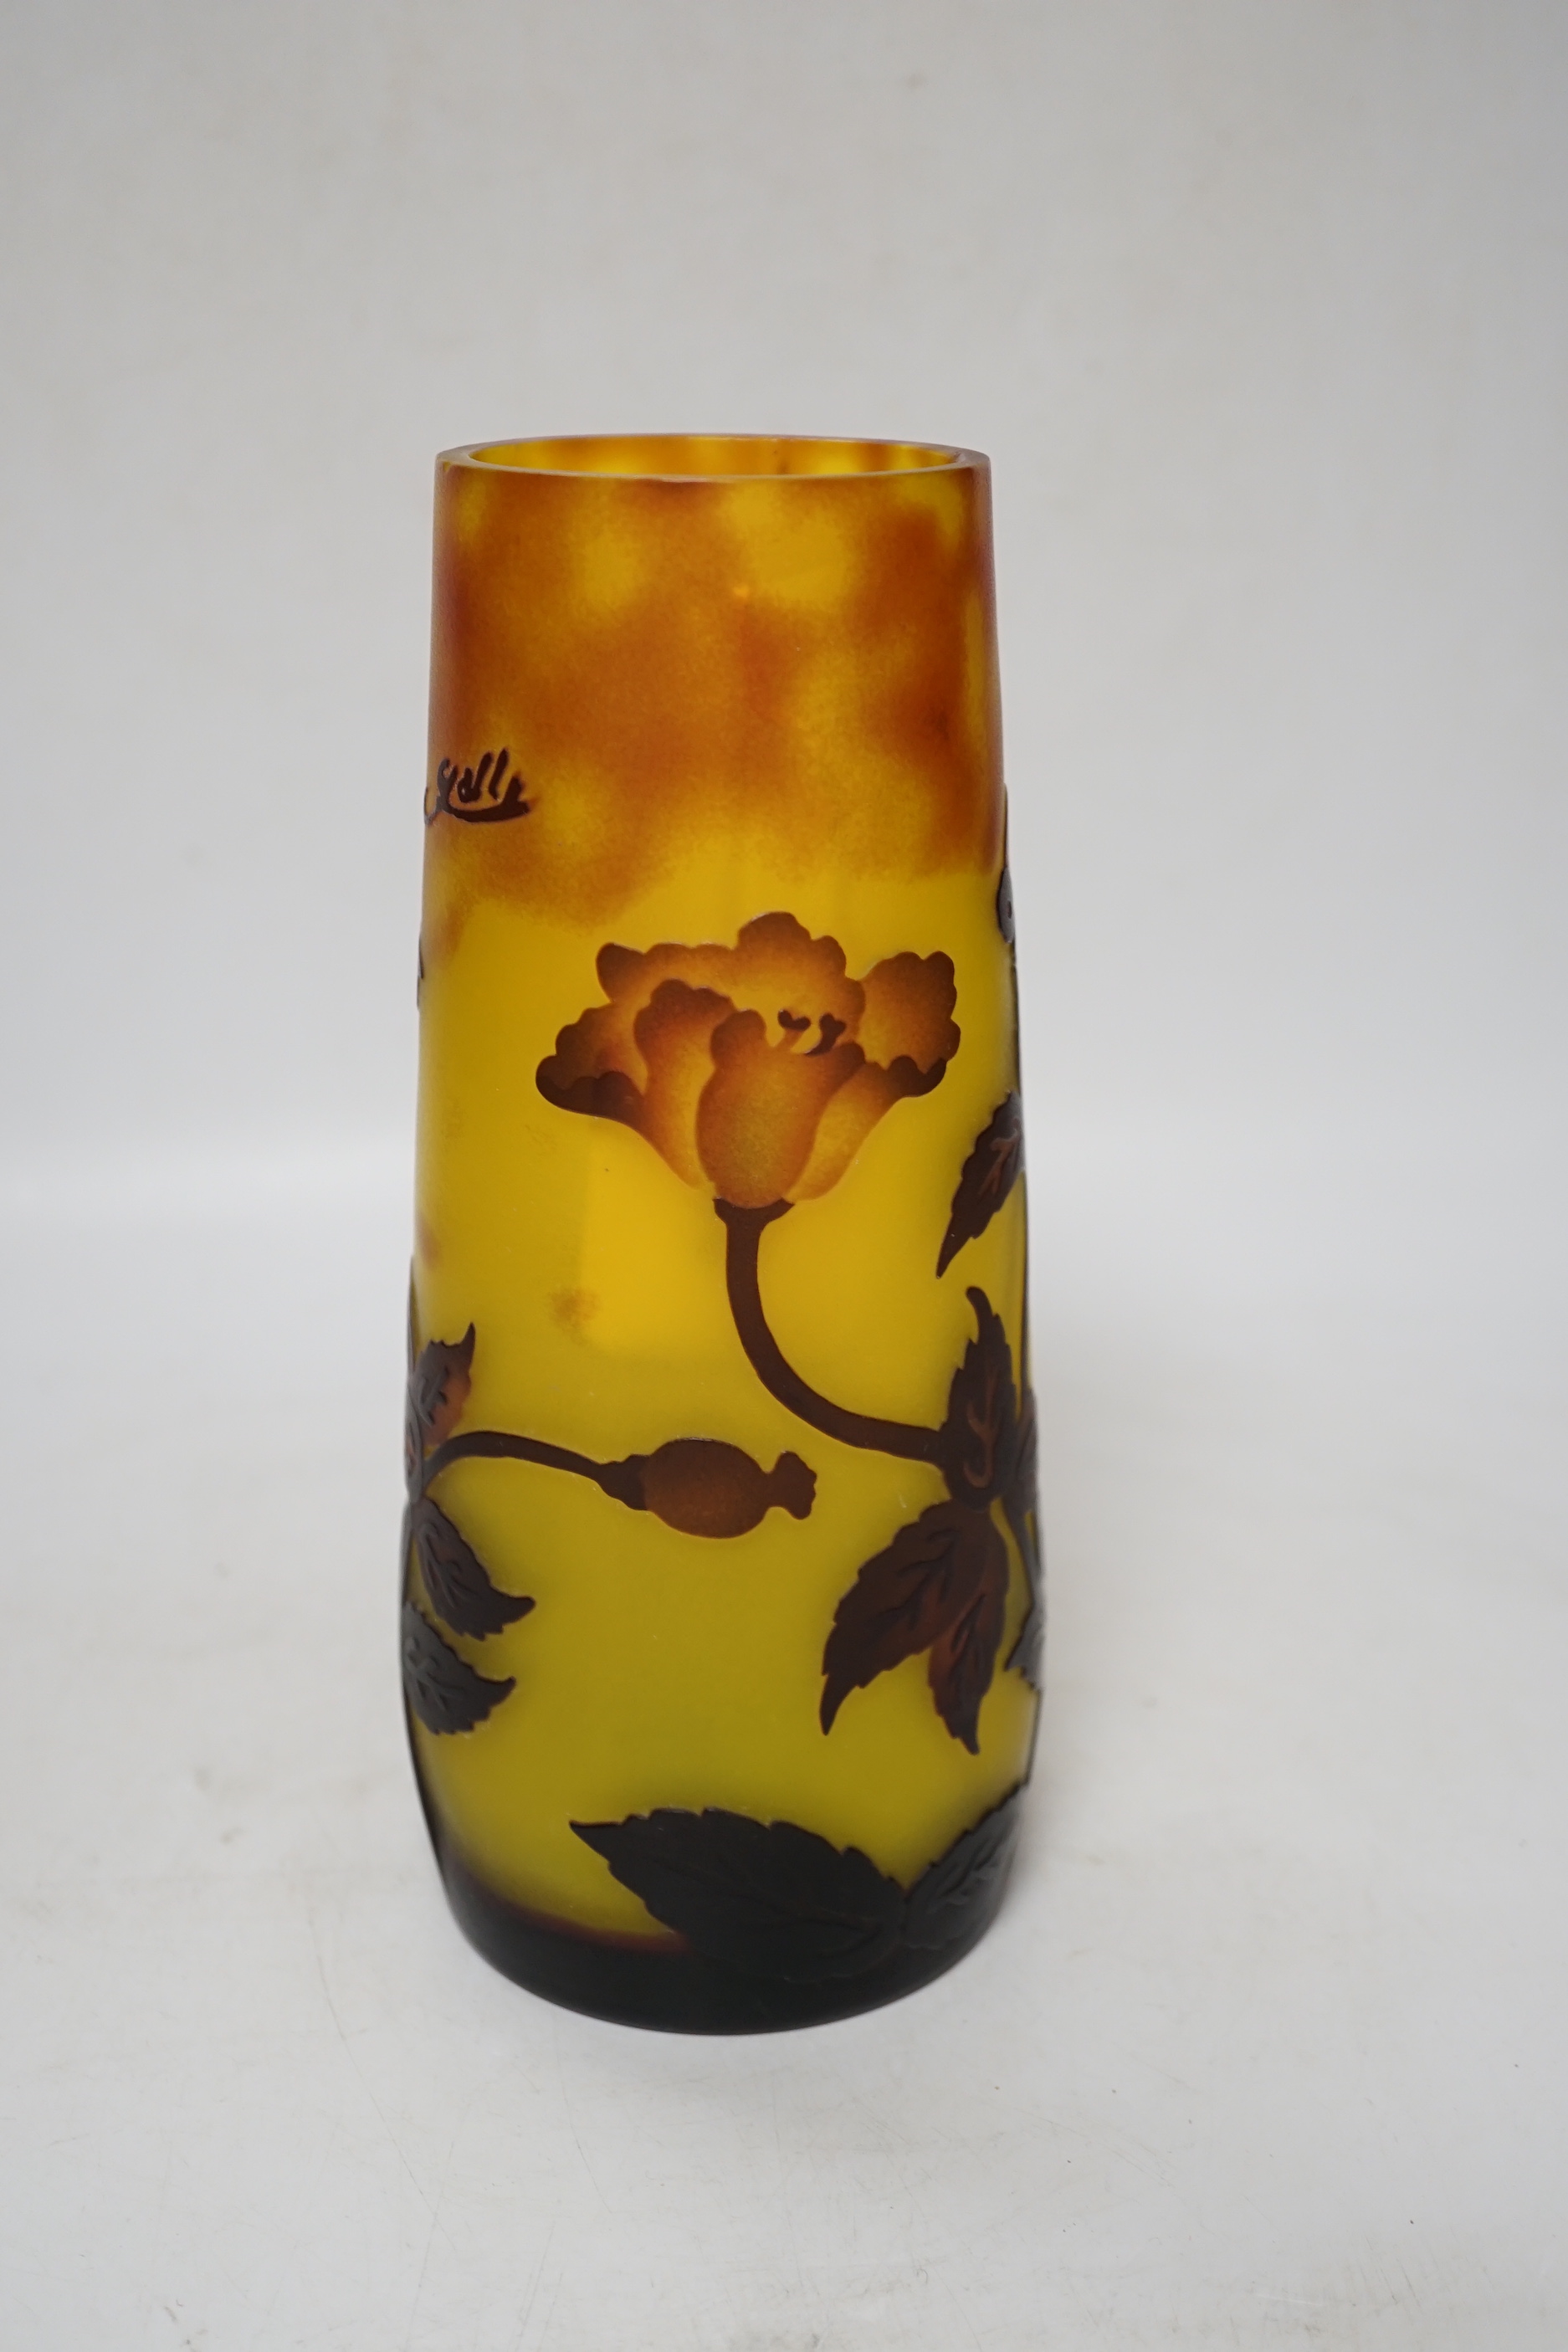 A Cameo glass vase in the style of Galle, decorated with poppies on yellow ground 22m high